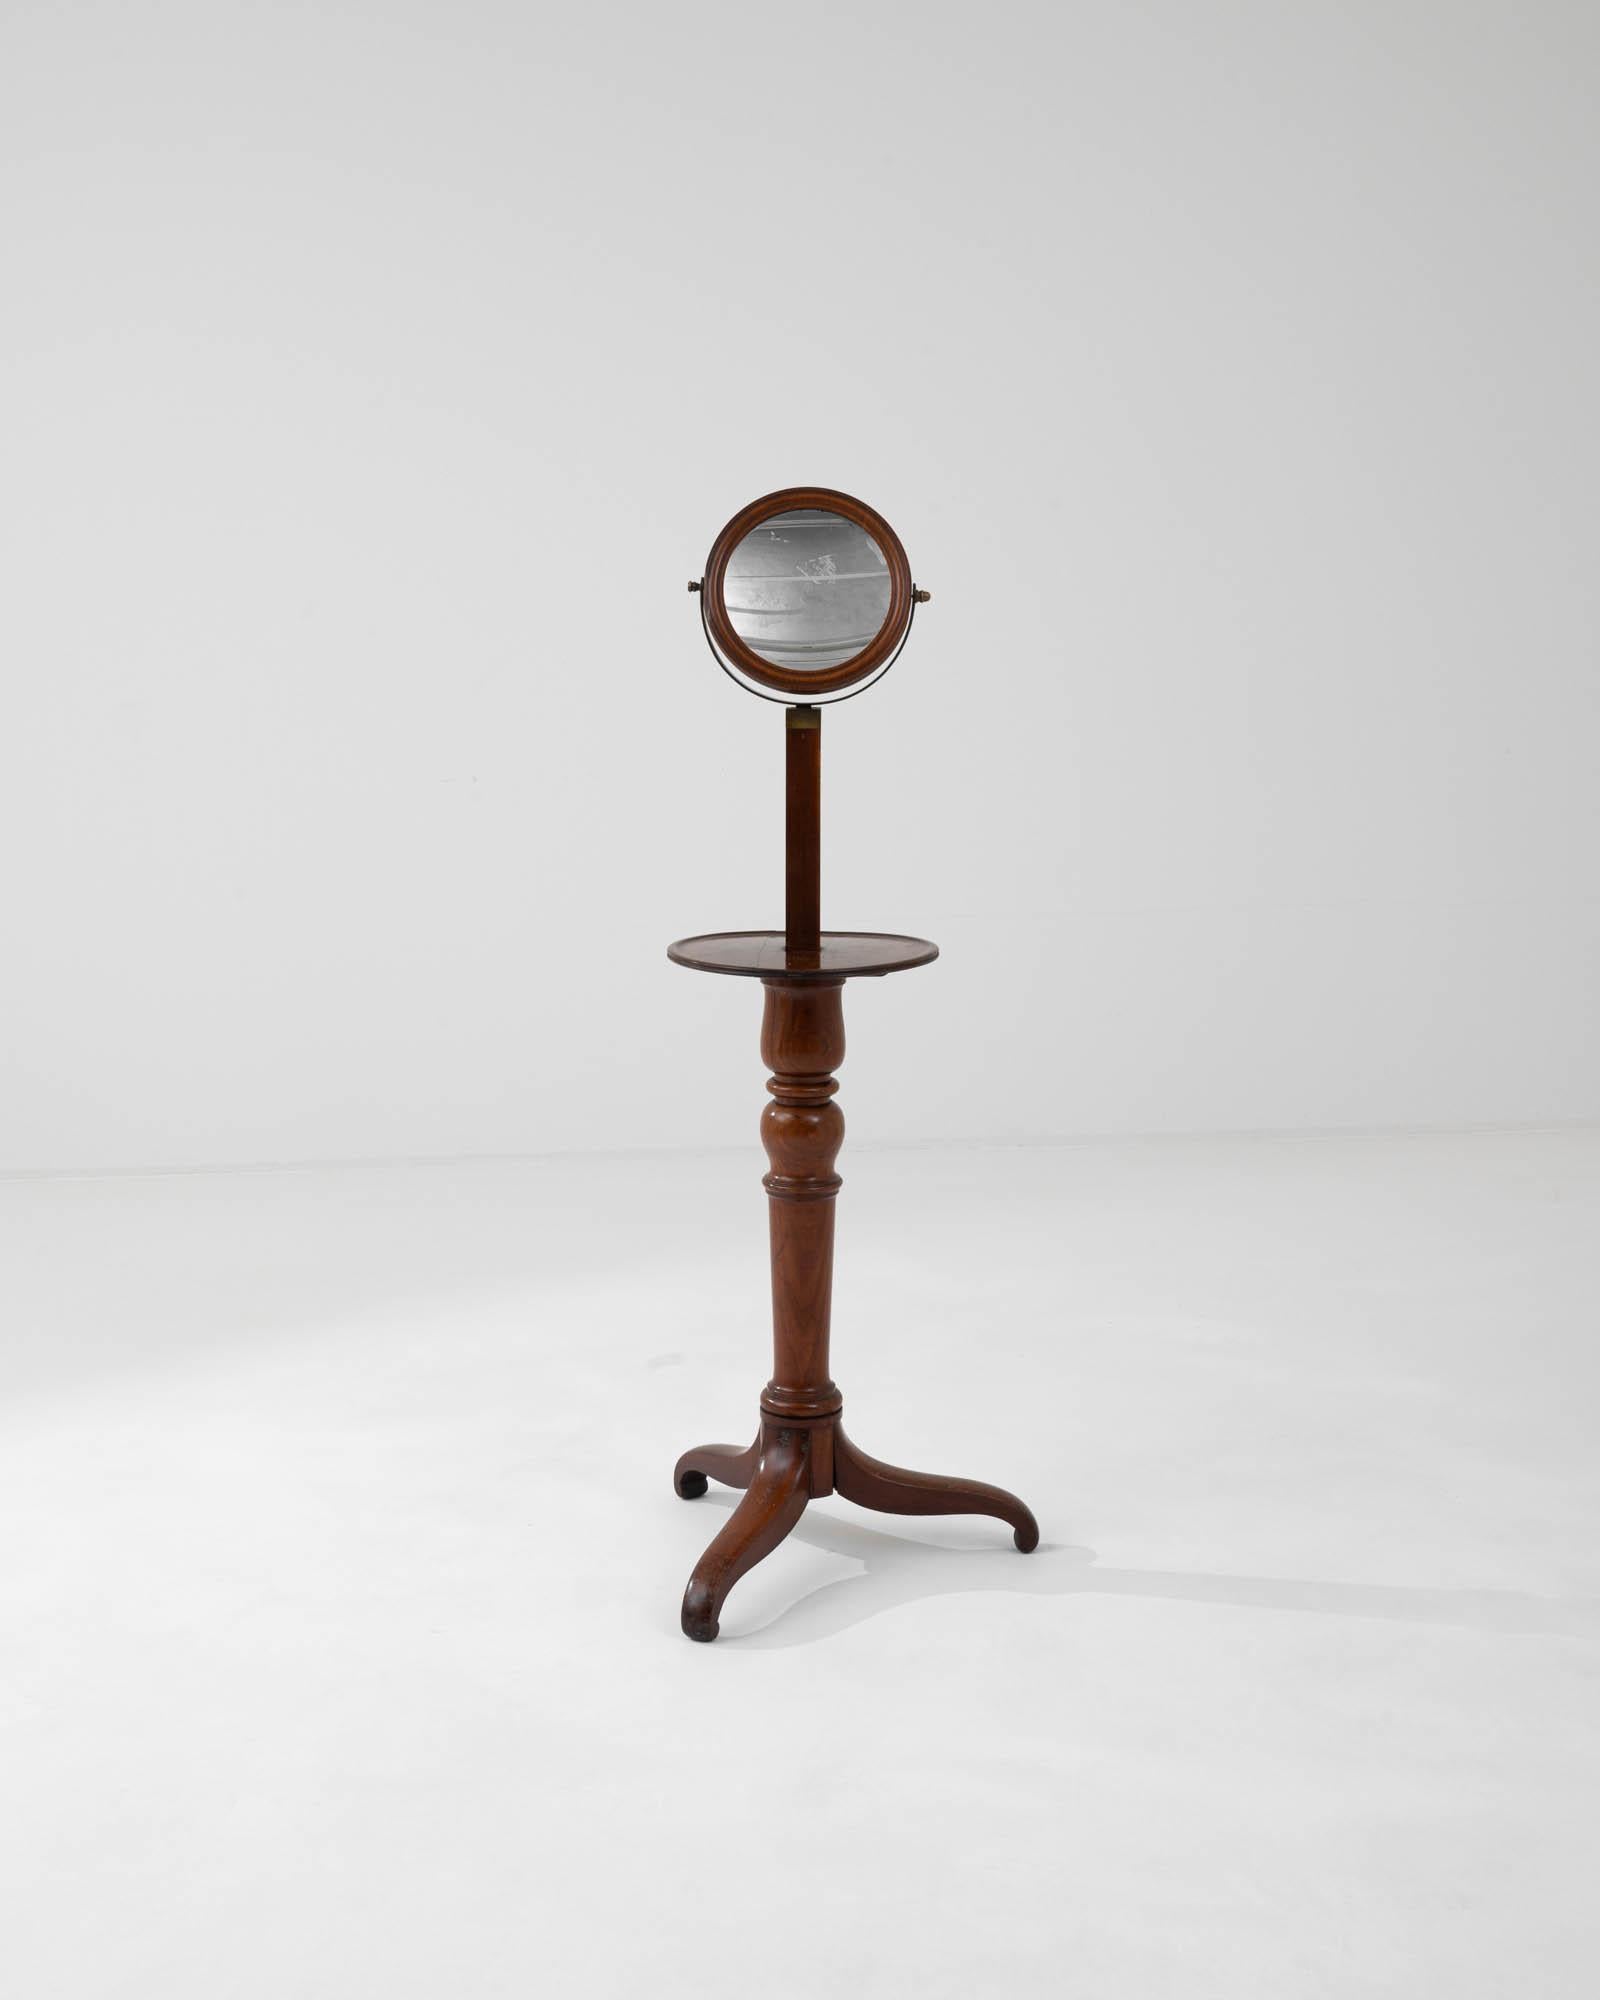 Useful both for shaving or applying makeup. The mirror can be tilted to suit many uses and is placed in an elegant round and carved frame with a brass hardware accent. This piece from nineteenth-century France, tinted to a mahogany color, comes with